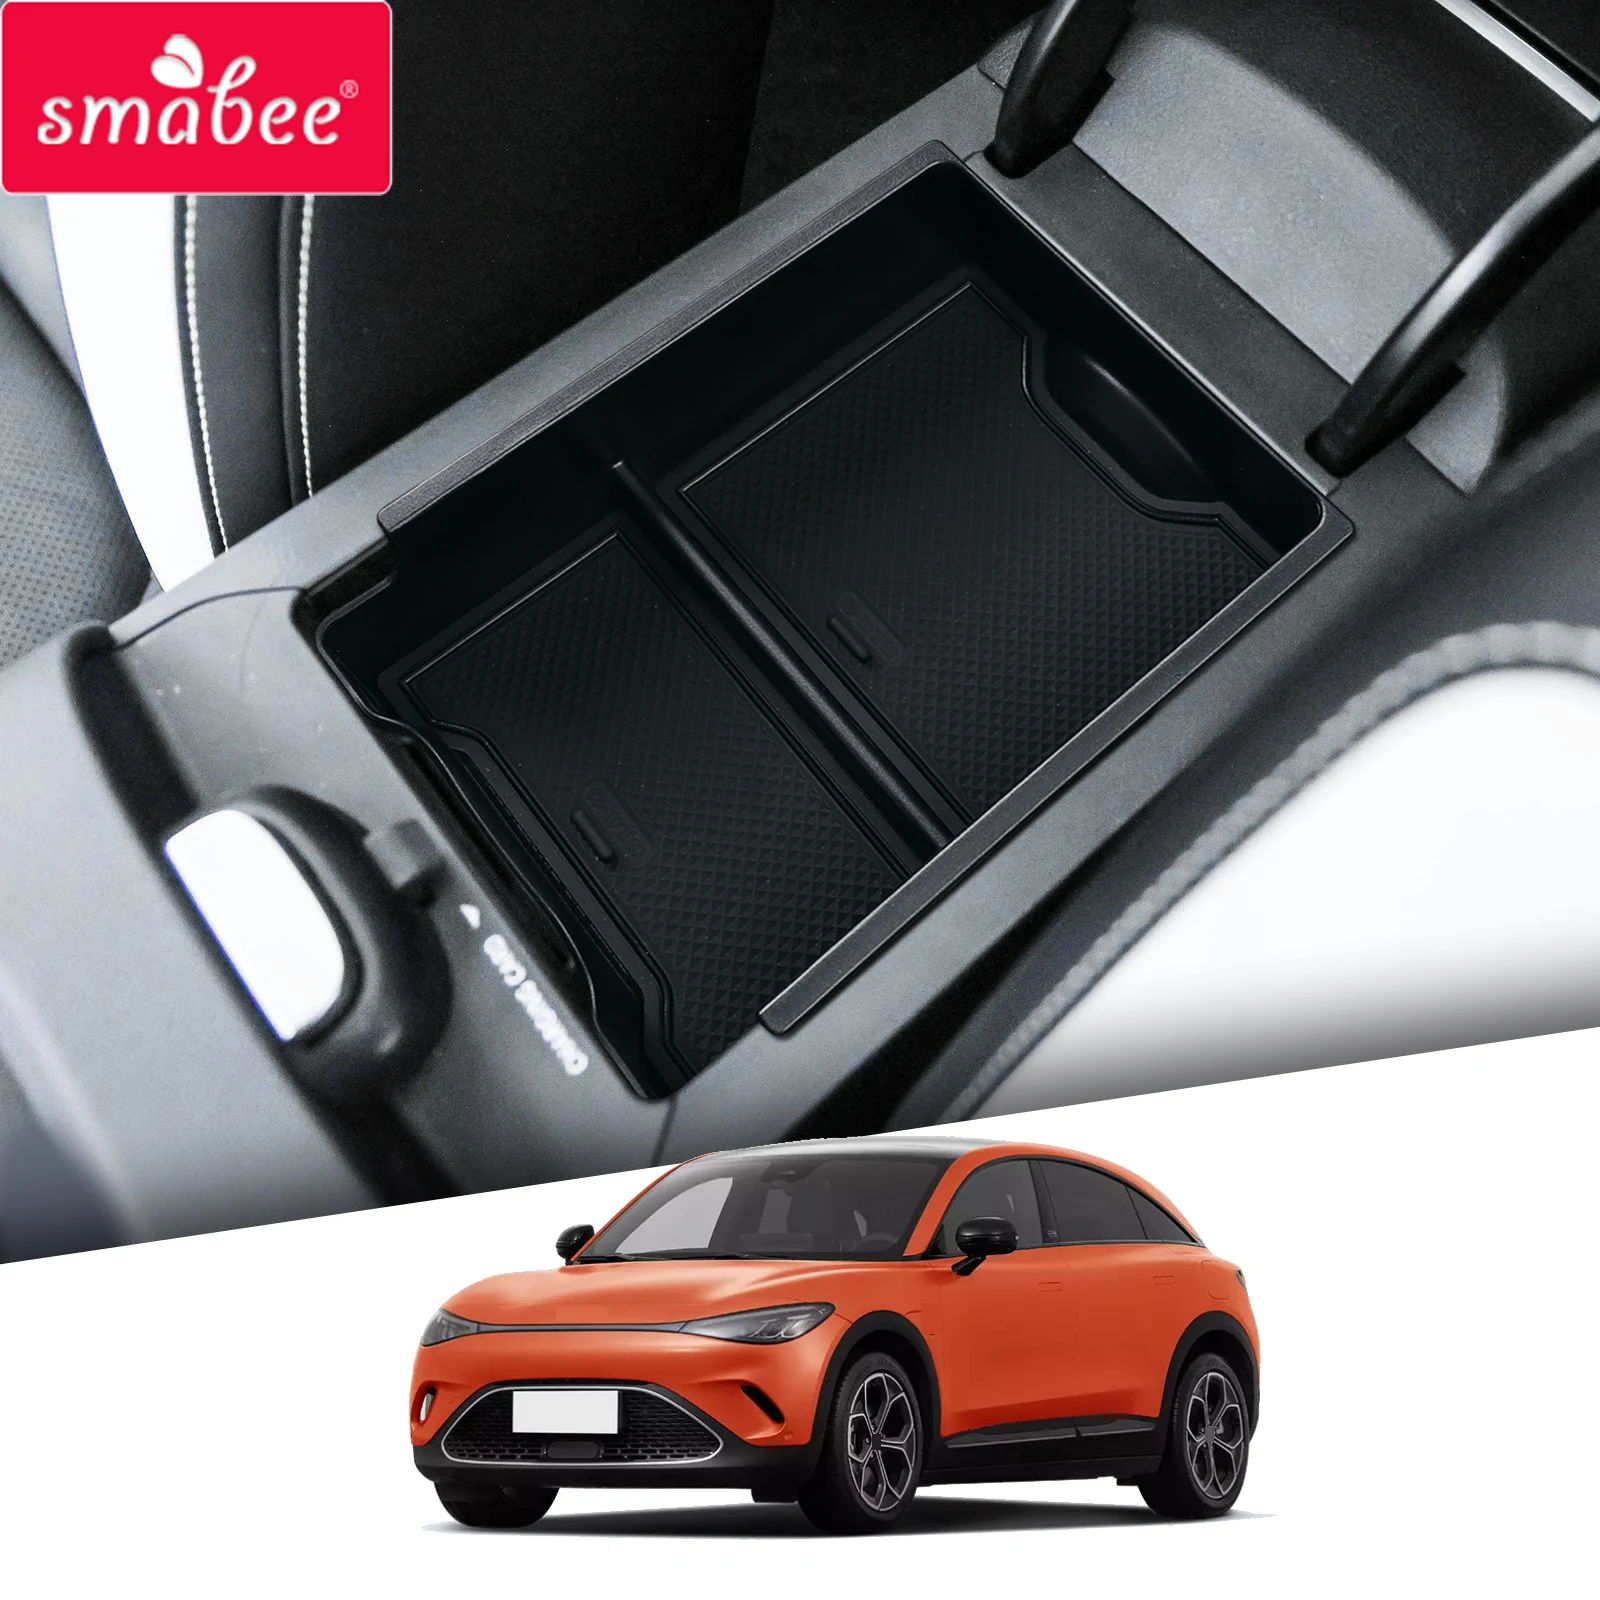 Smabee Car Center Console Armrest Storage Box for Smart #1 #3 Stowing Tidying Organizer Interior Accessories Regular/flocking